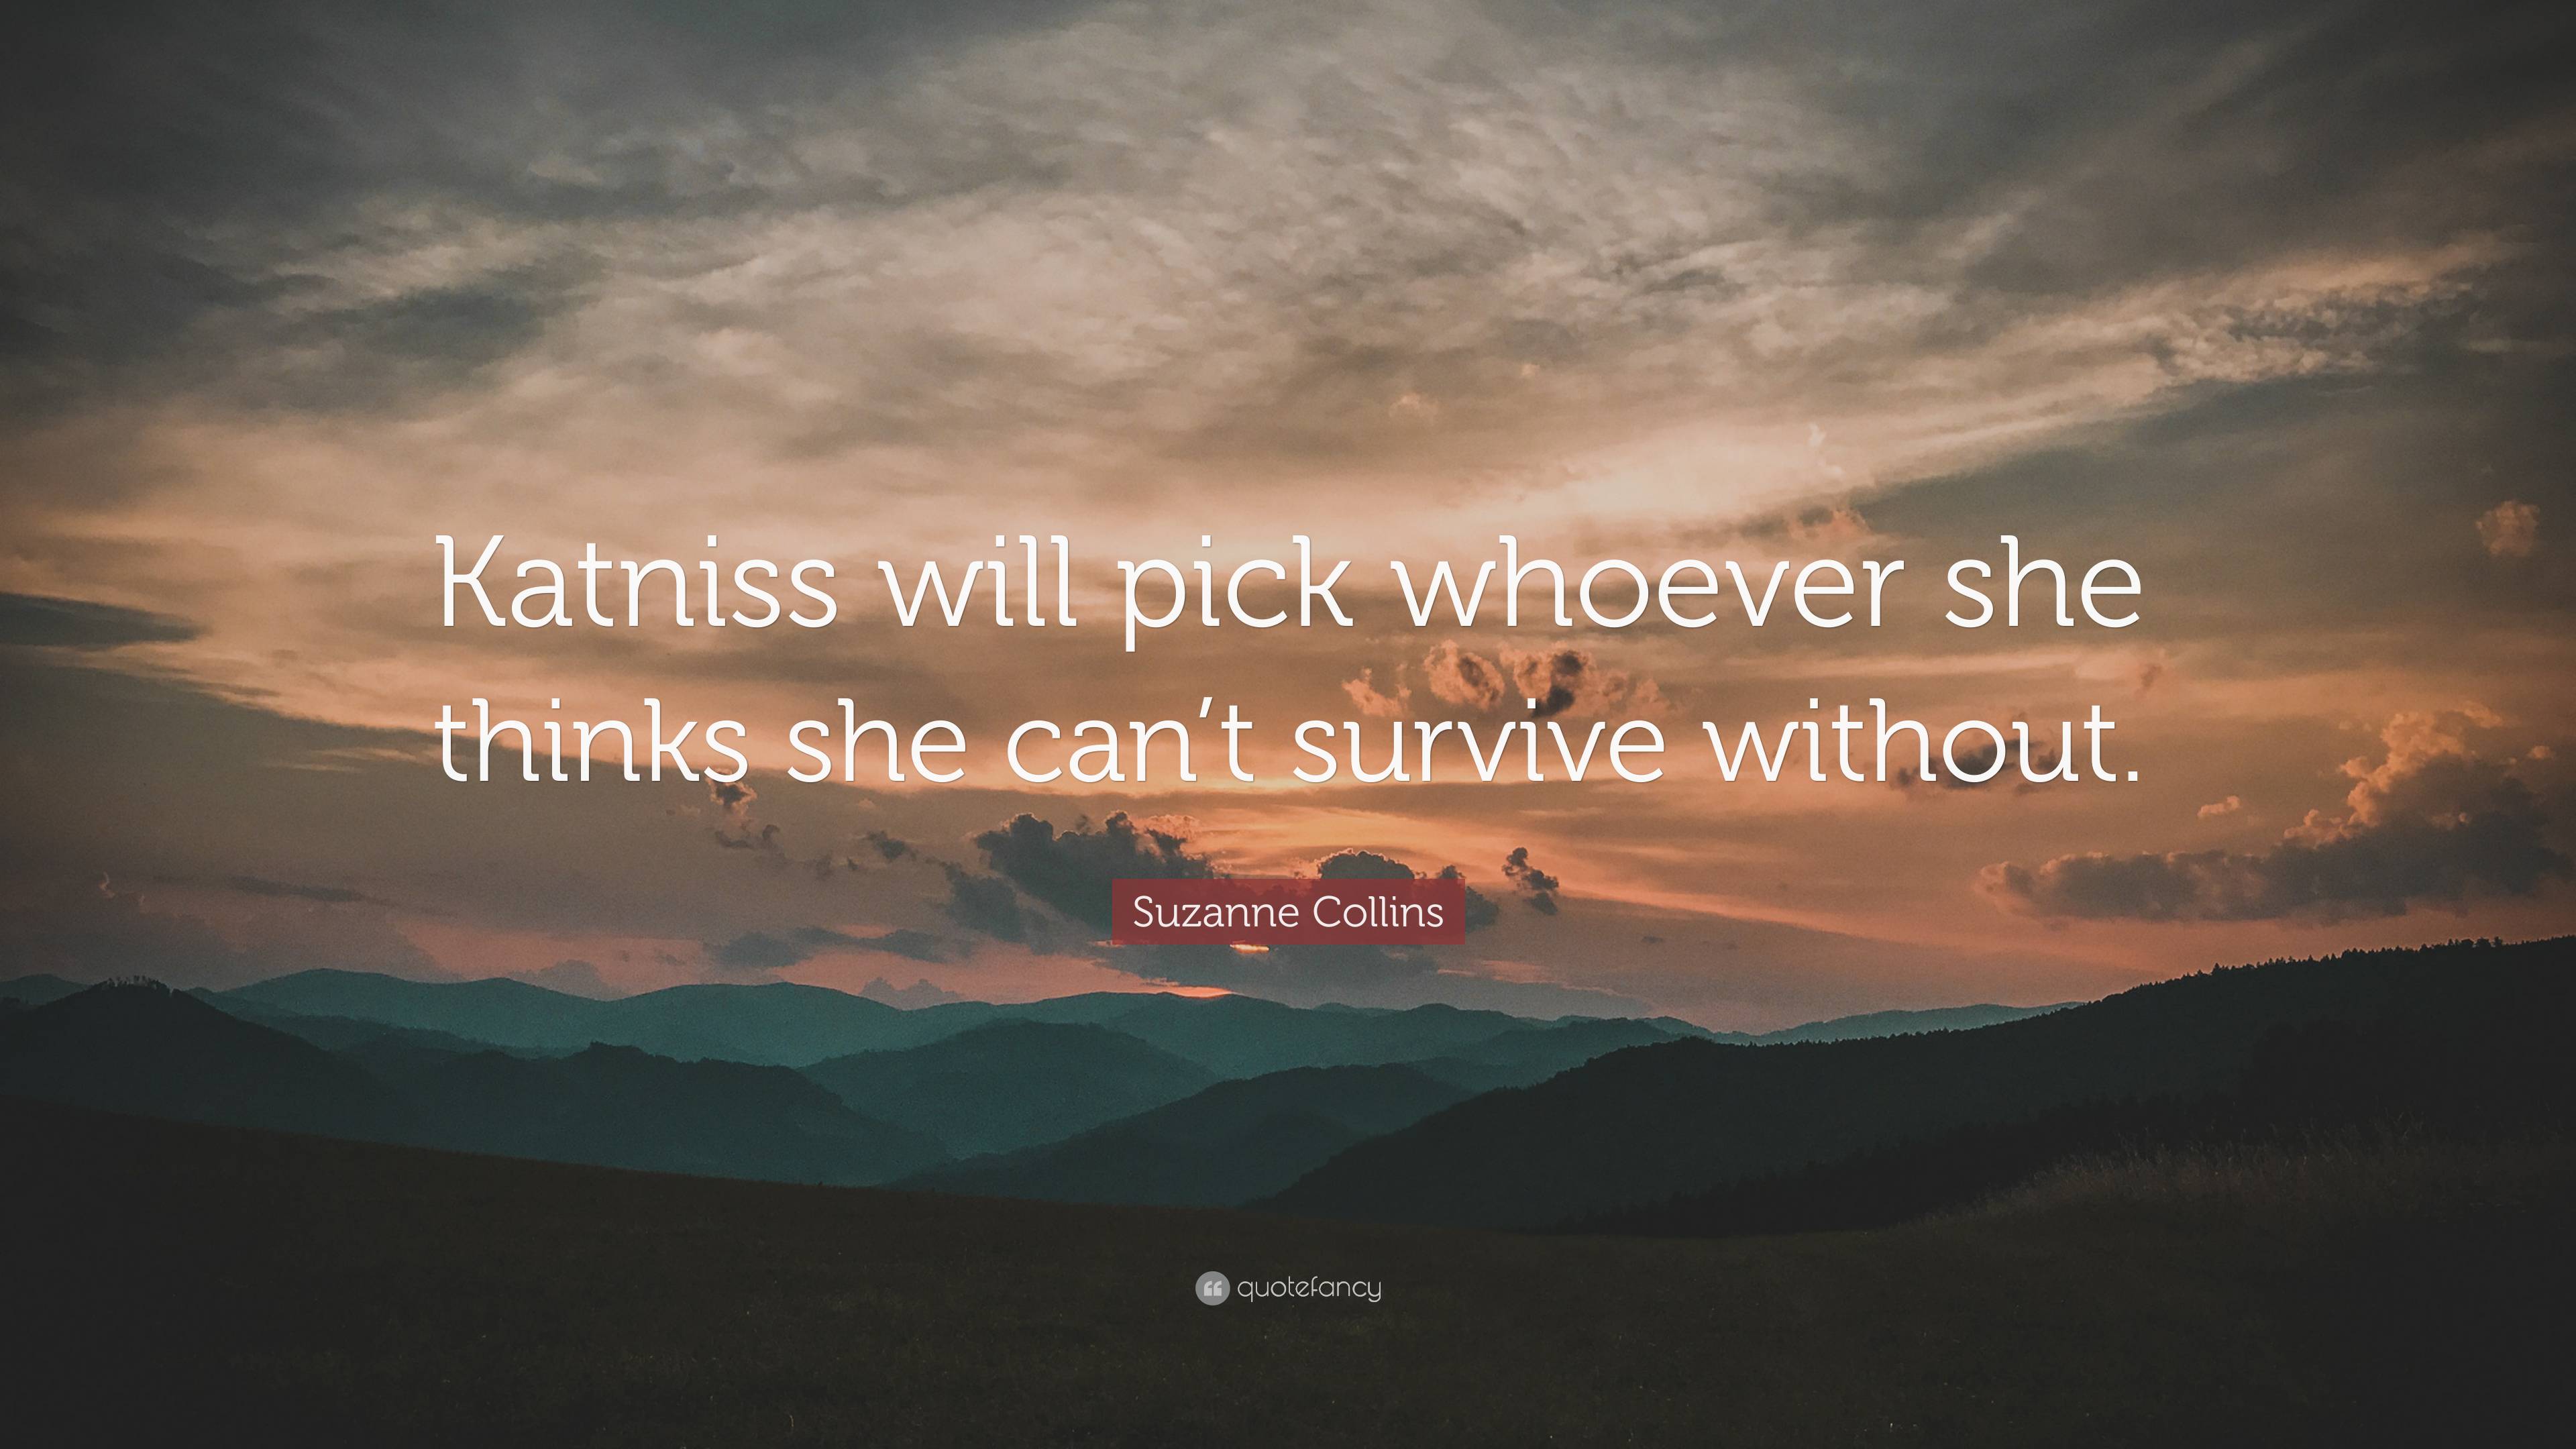 Suzanne Collins Quote: “Katniss will pick whoever she thinks she can’t ...